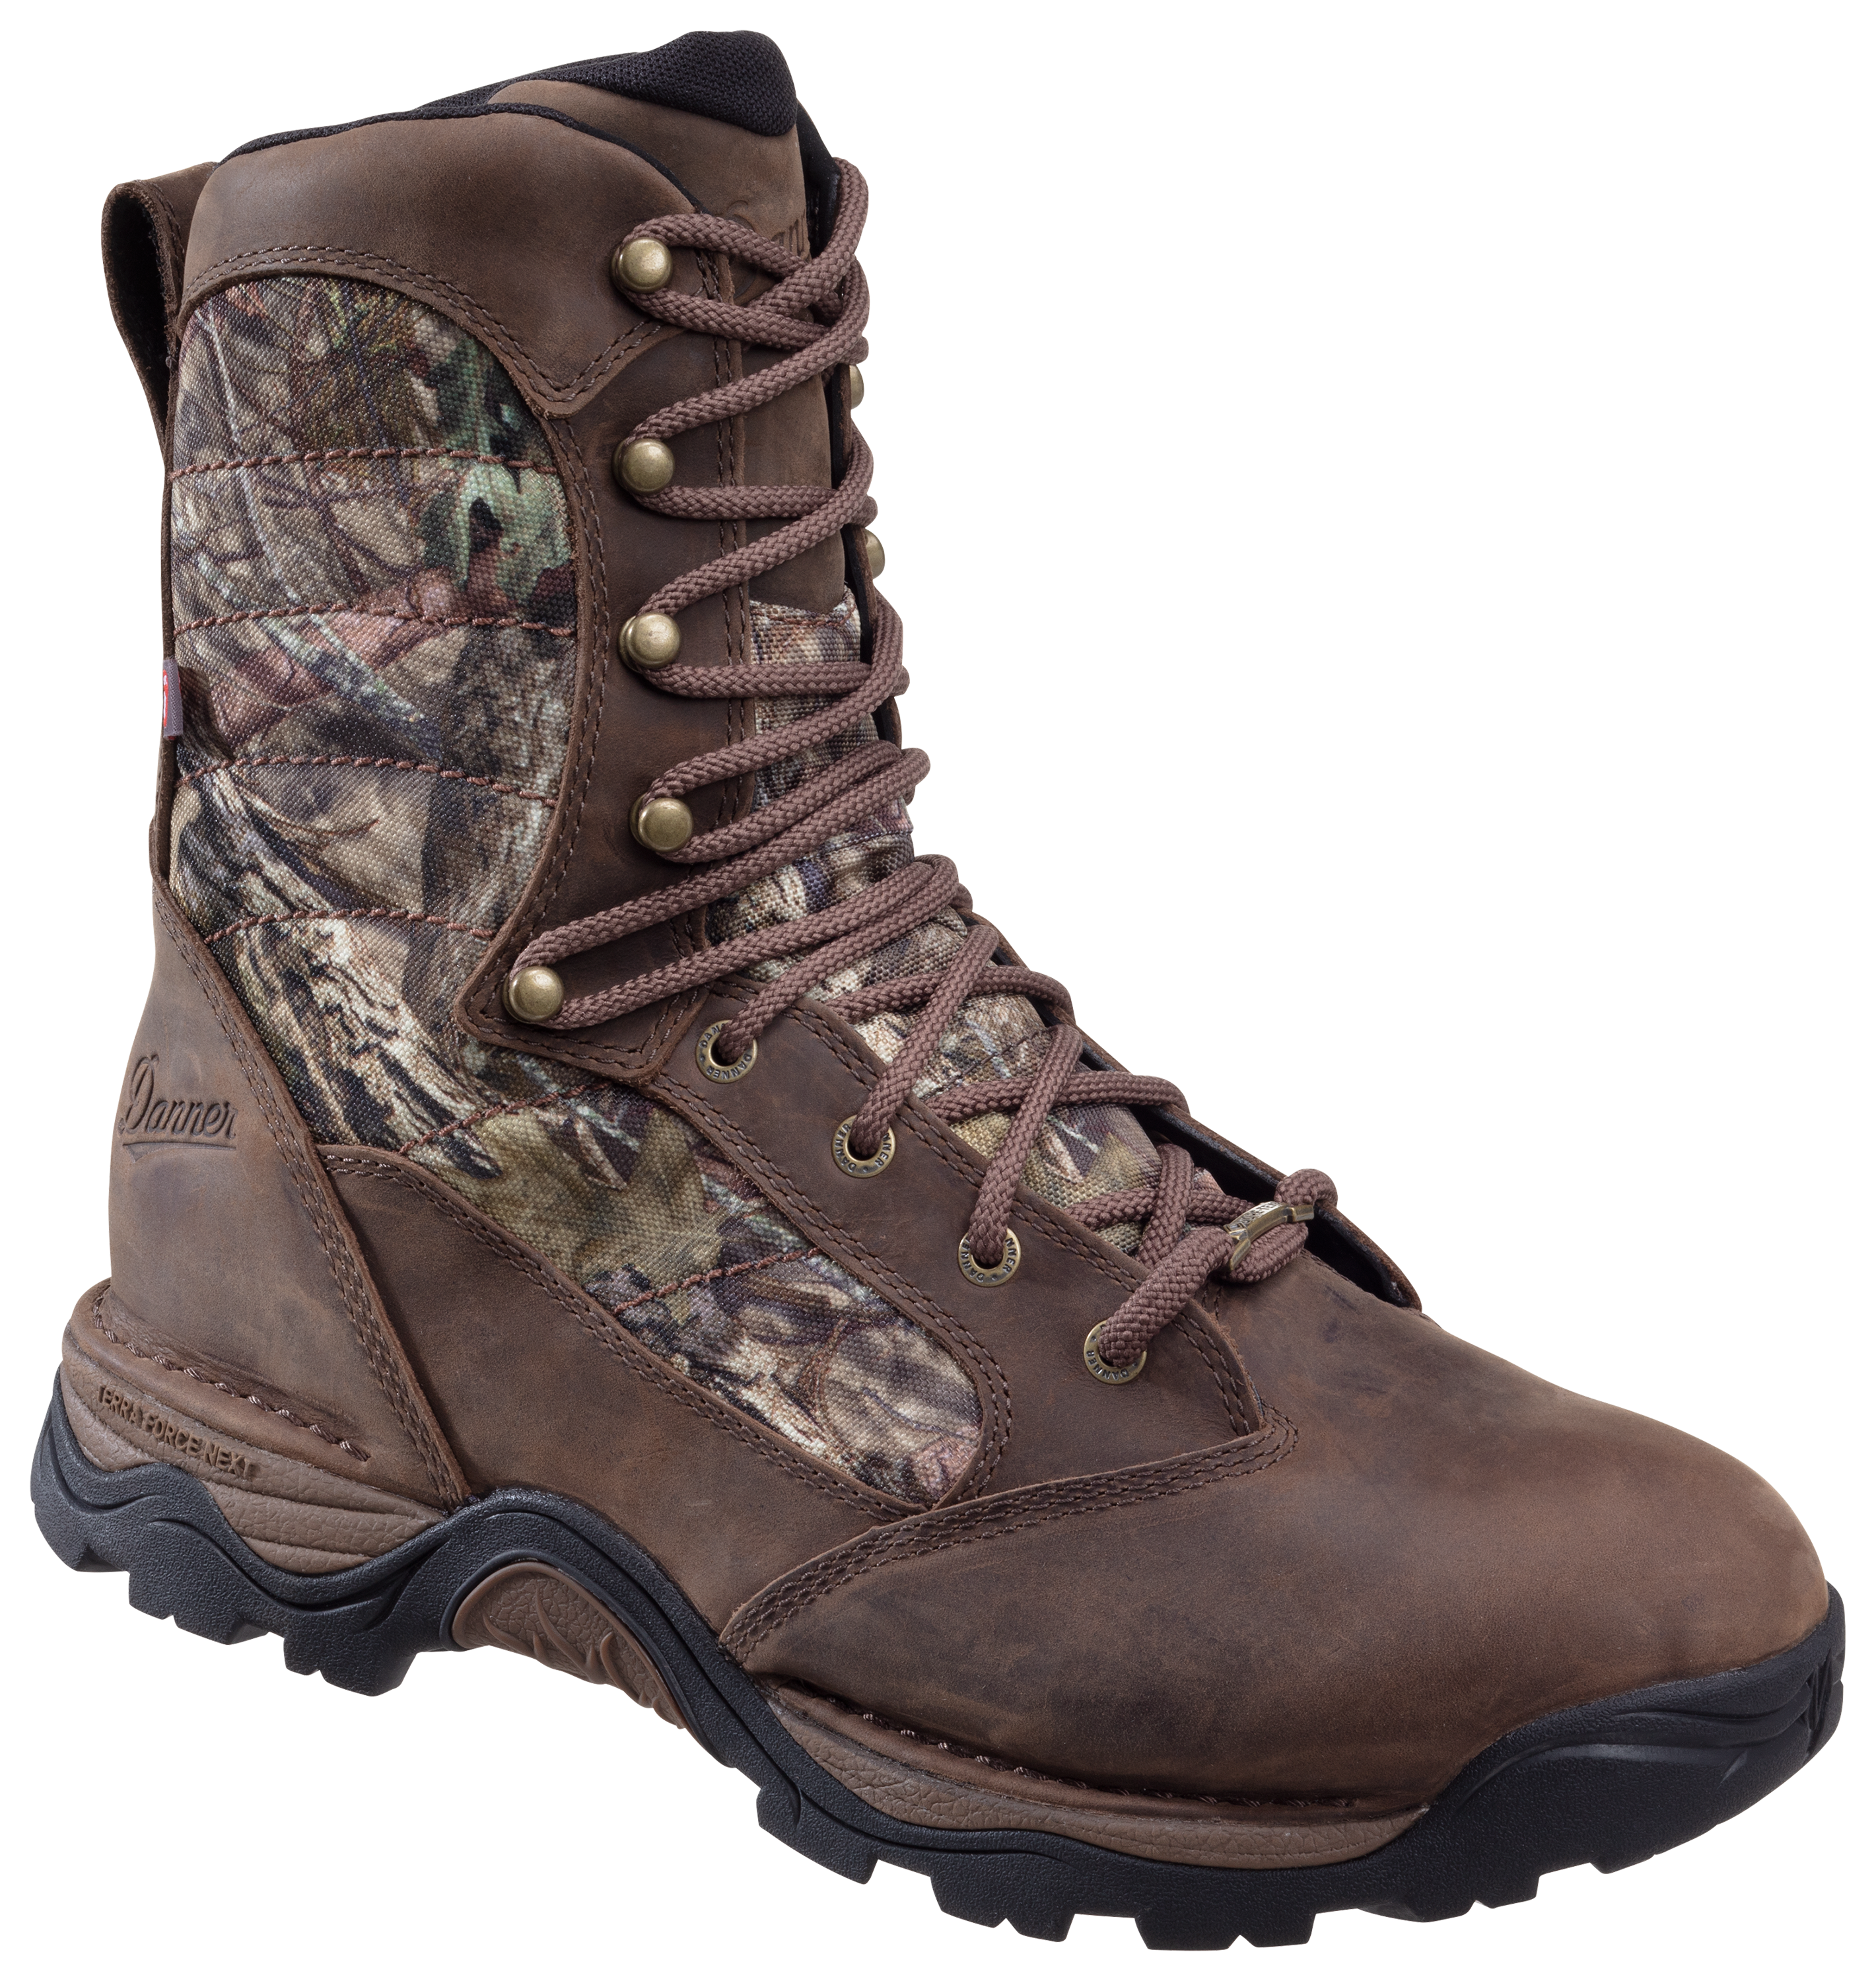 Danner Pronghorn 800 Insulated GORE-TEX Hunting Boots for Men - Mossy Oak Break-Up Country - 12M